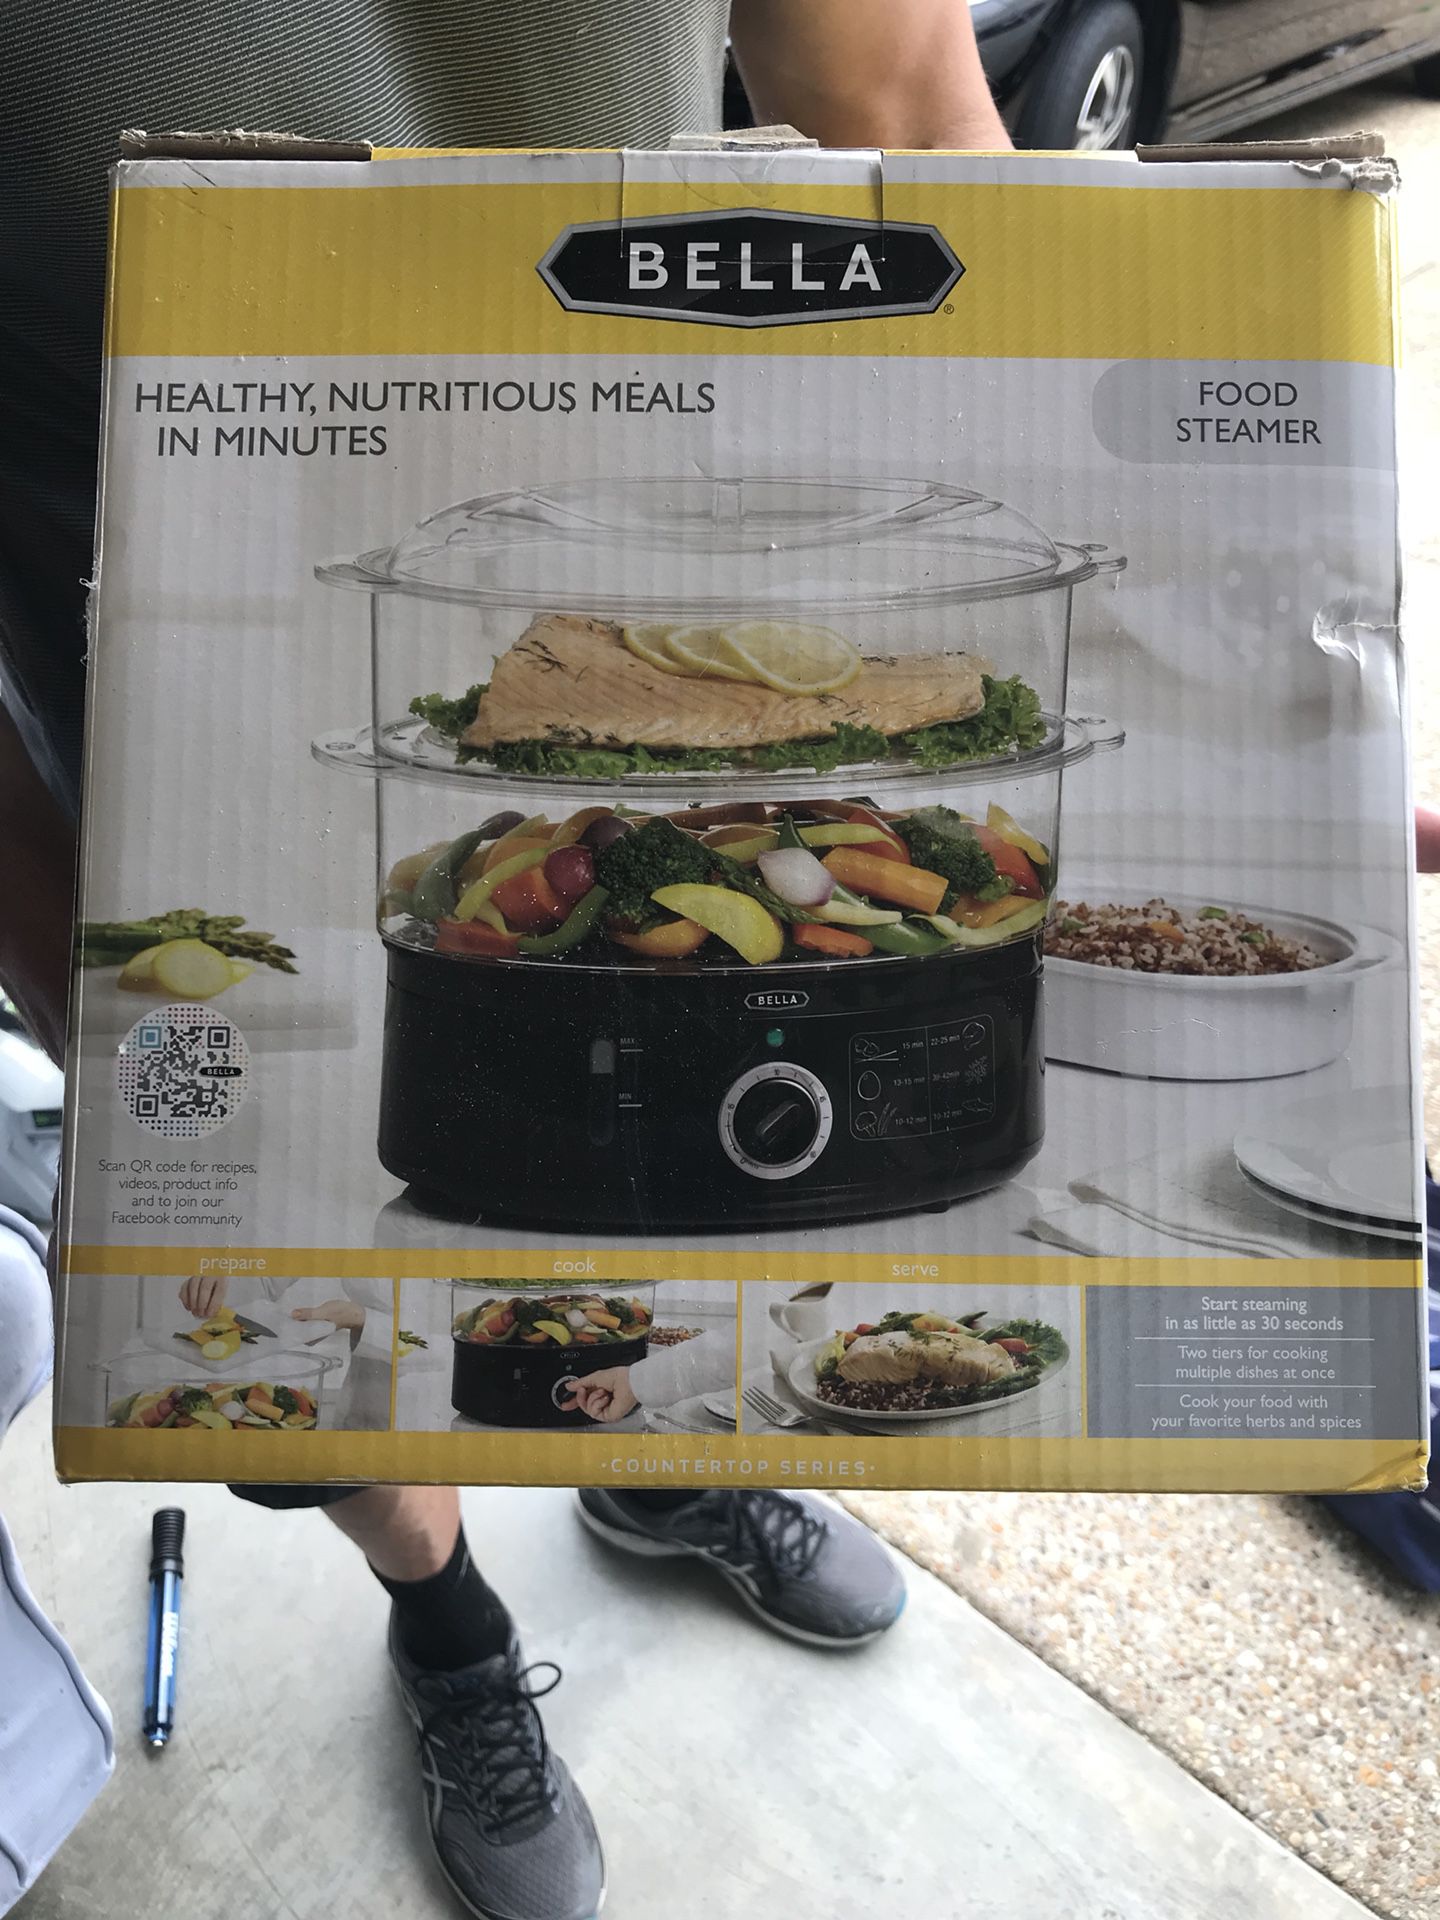 Food steamer (new in box)